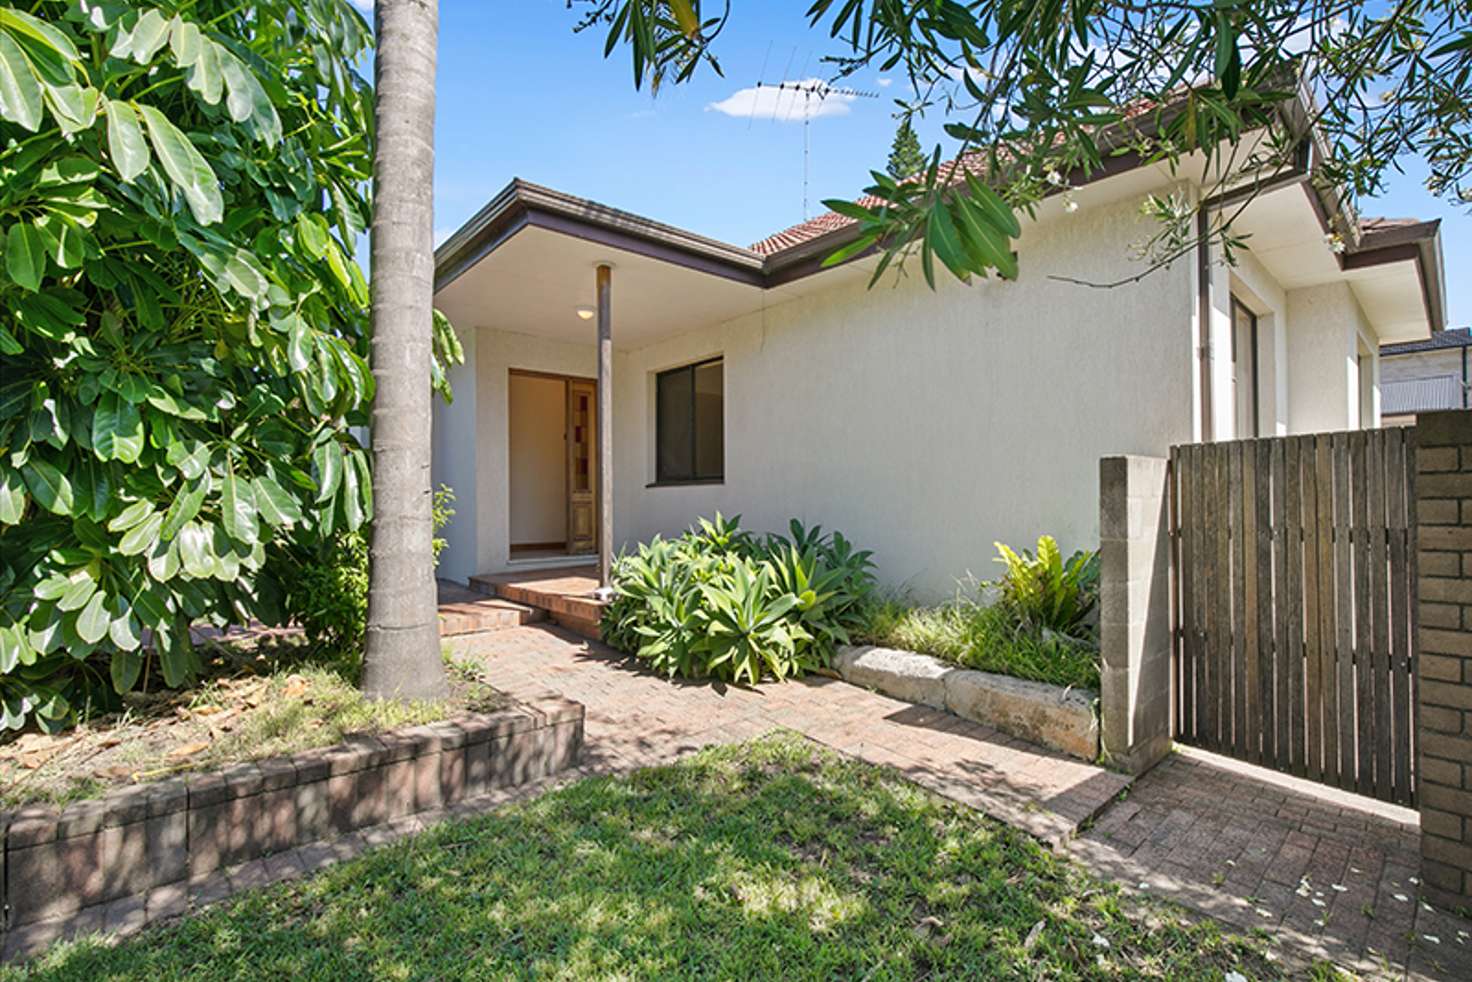 Main view of Homely house listing, 64 Rowley St, Guildford NSW 2161